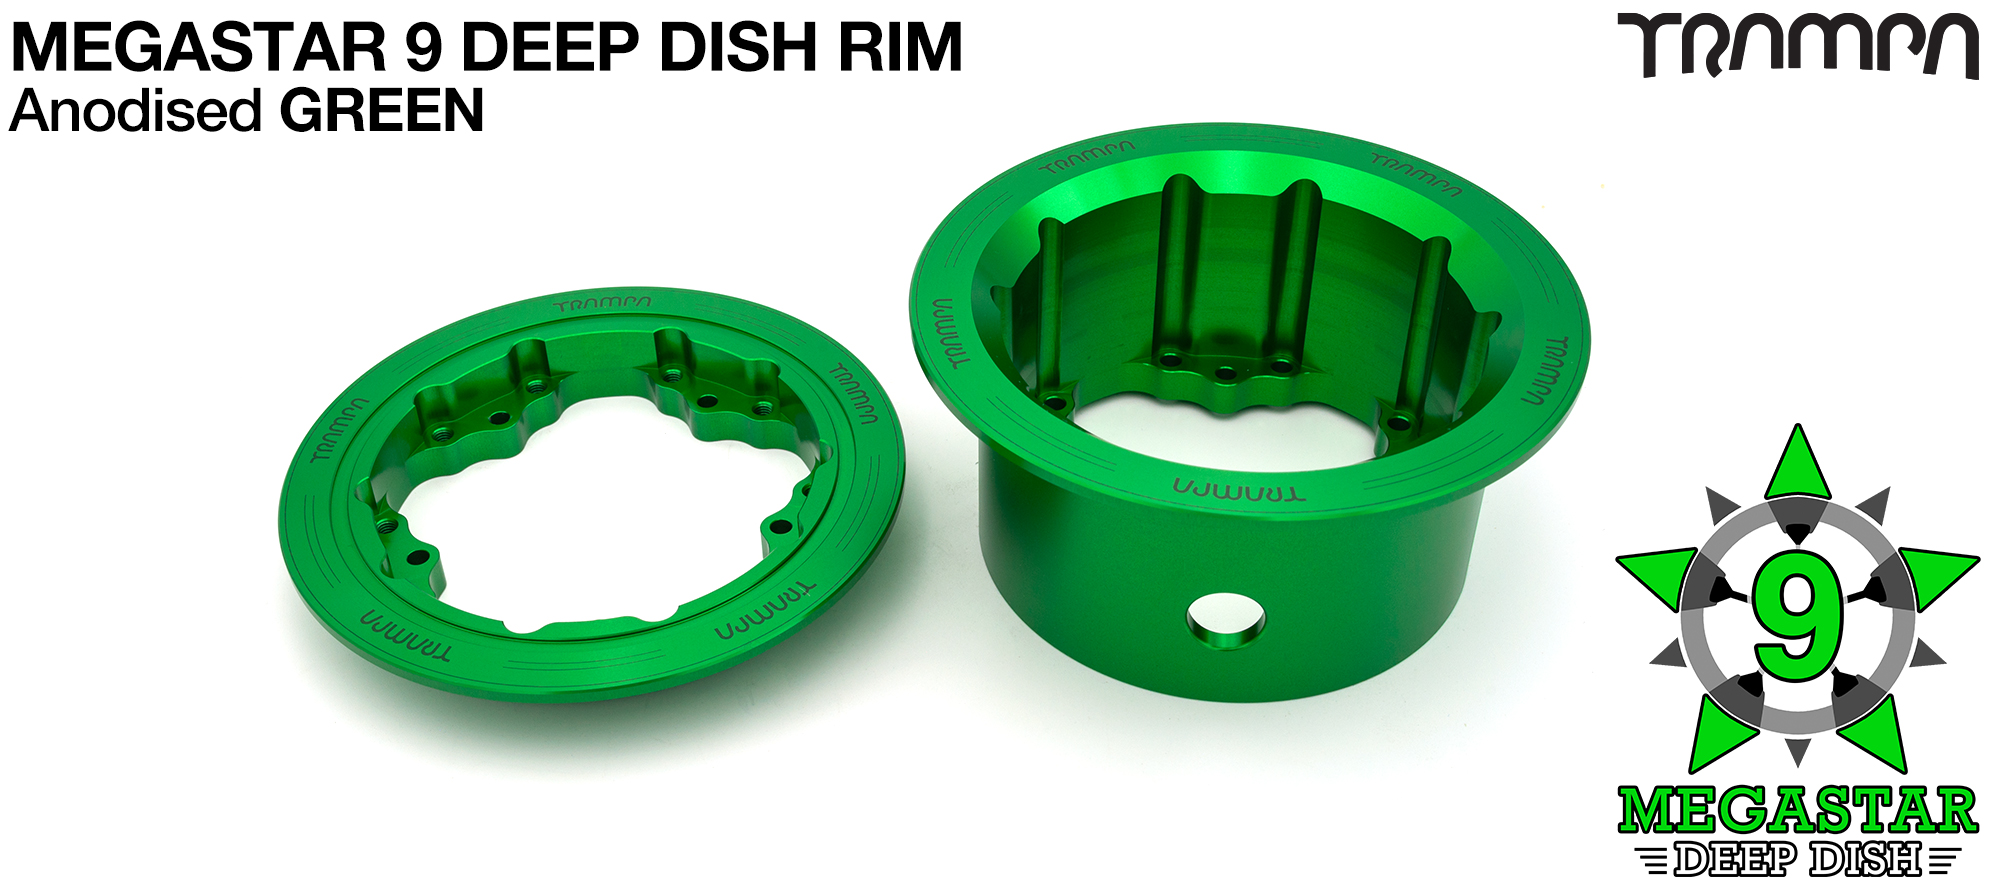 MEGASTAR 9 DD Rims Measure 3.75/4x 3 Inch. The Bearings are positioned DEEP-DISH OFF-SET & accept 3.75 & 4 Inch Rim Tyres - GREEN